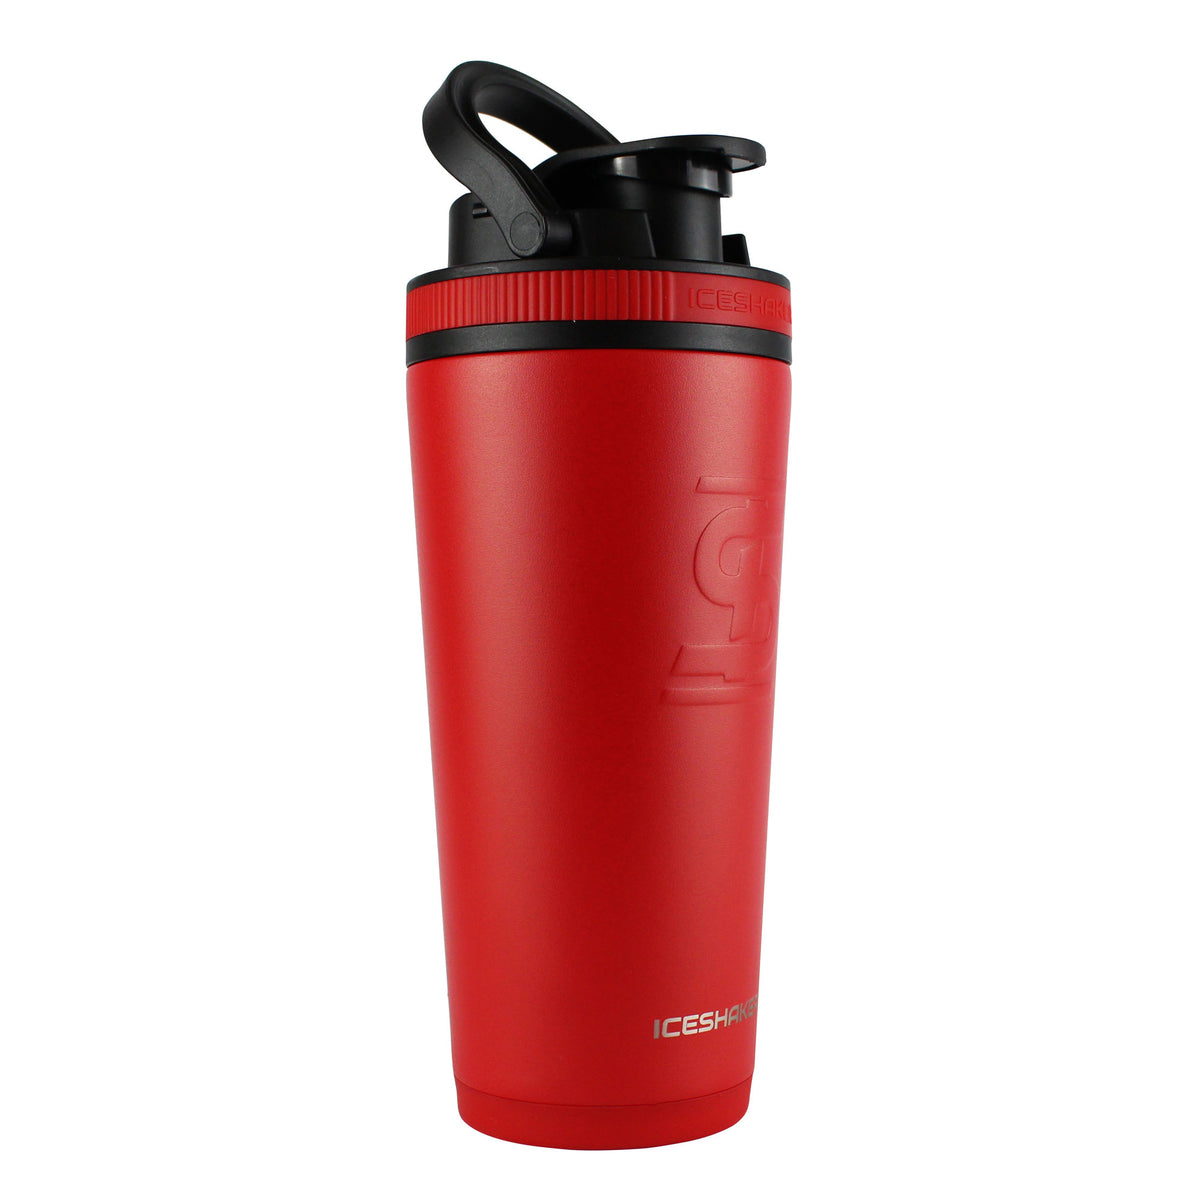 26oz Vacuum-Insulated Ice Shaker Cup – 5% Nutrition